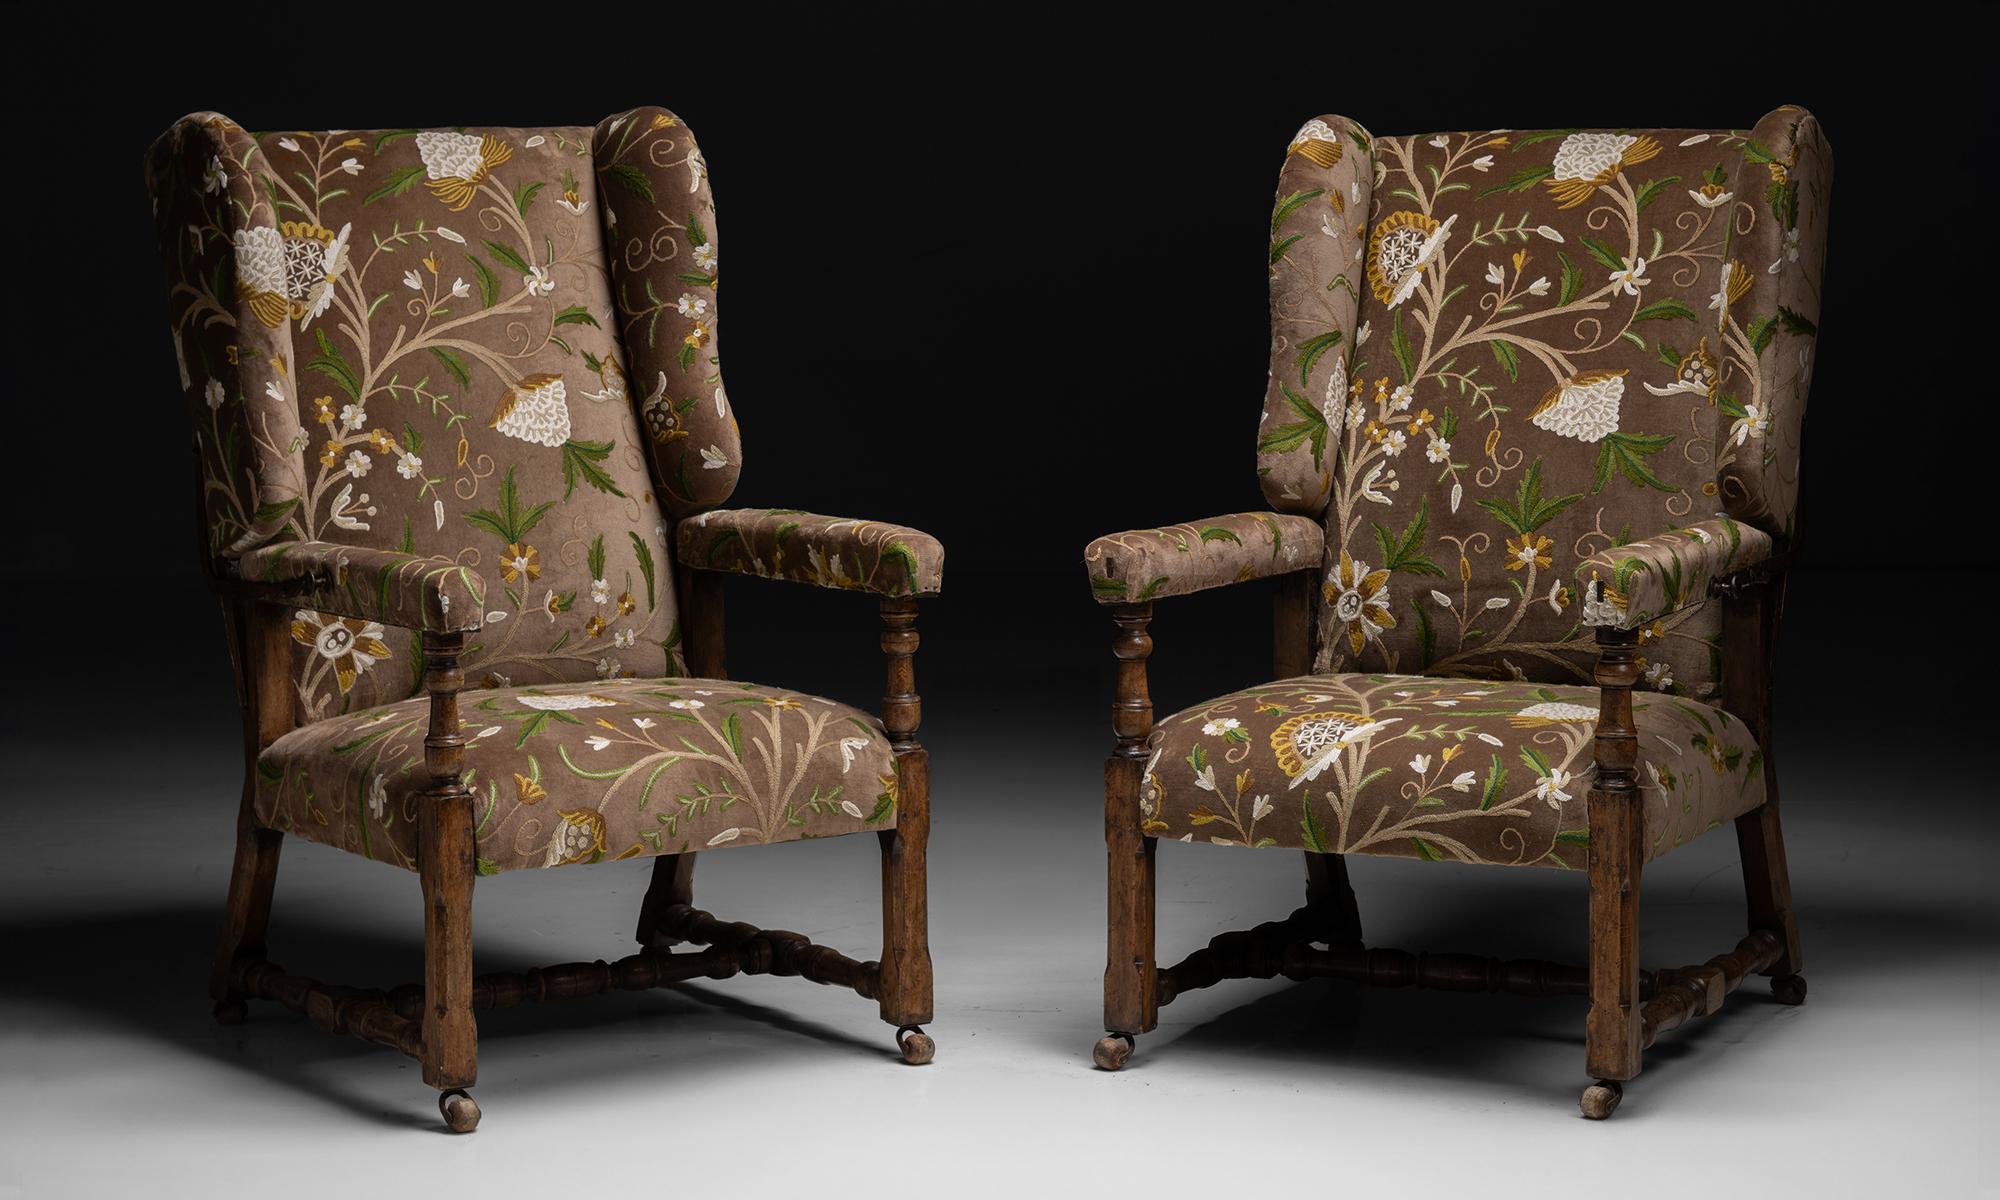 Reclining Wing Chairs in Crewel Velvet

France circa 1880

Newly upholstered in velvet crewel by Marvic, on antique reclining frame. With wooden castors.

28